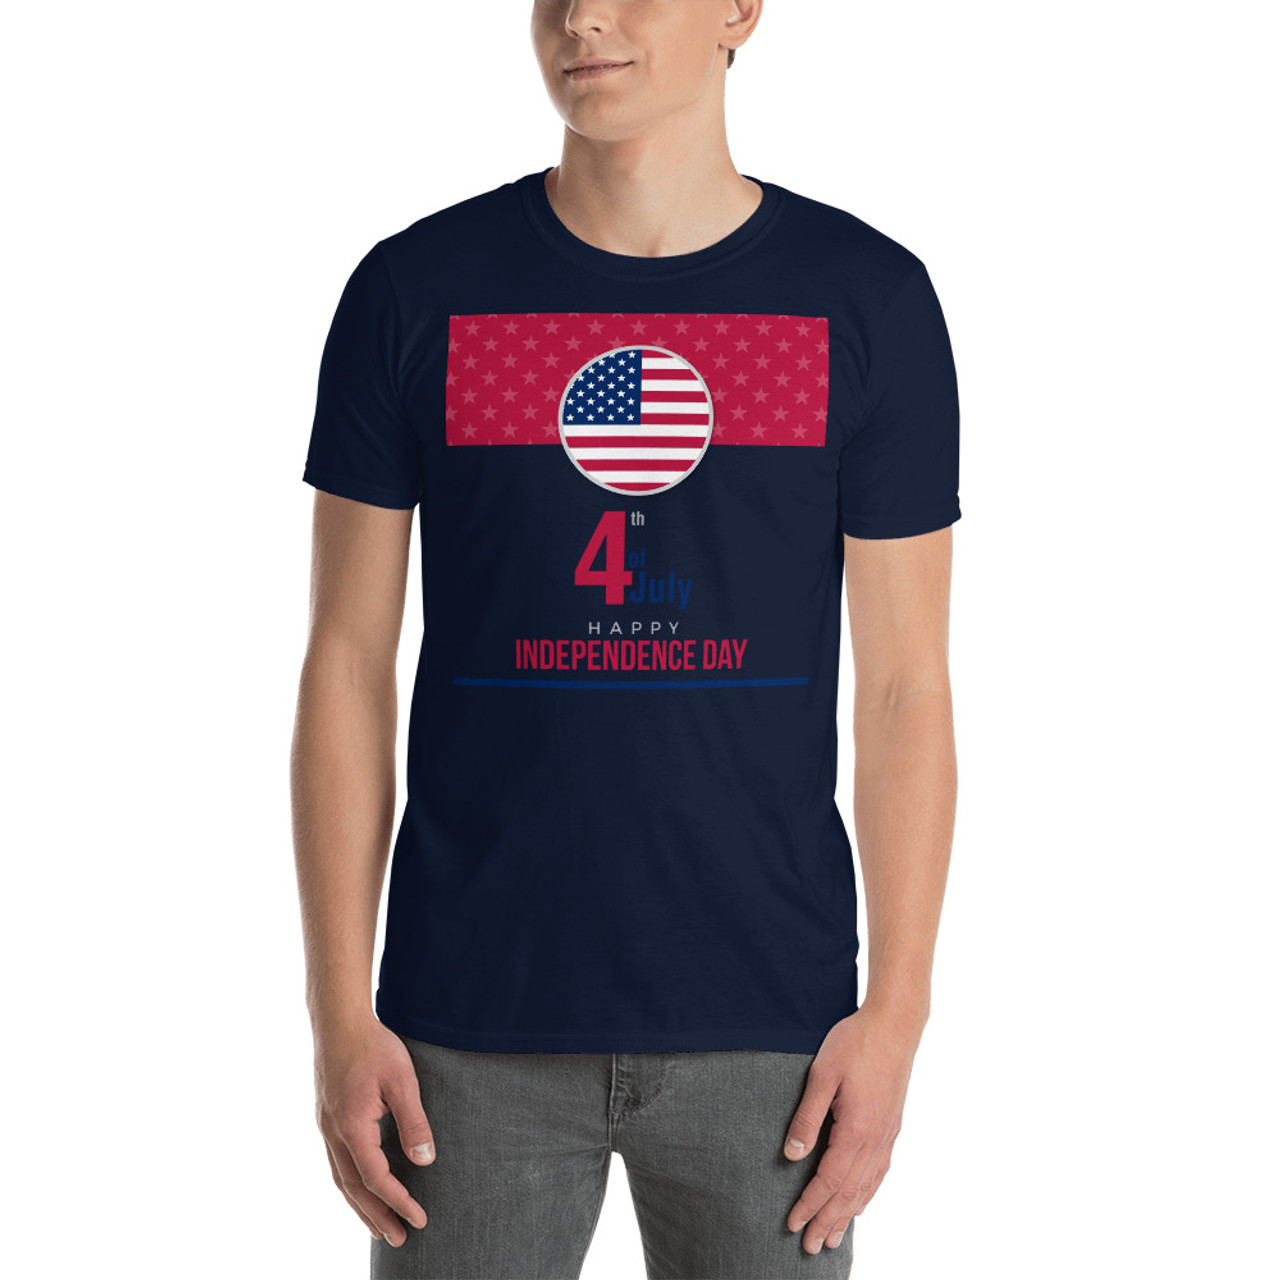 Independence Day (Version 4) Short-Sleeve Unisex T-Shirt - Meach's ...